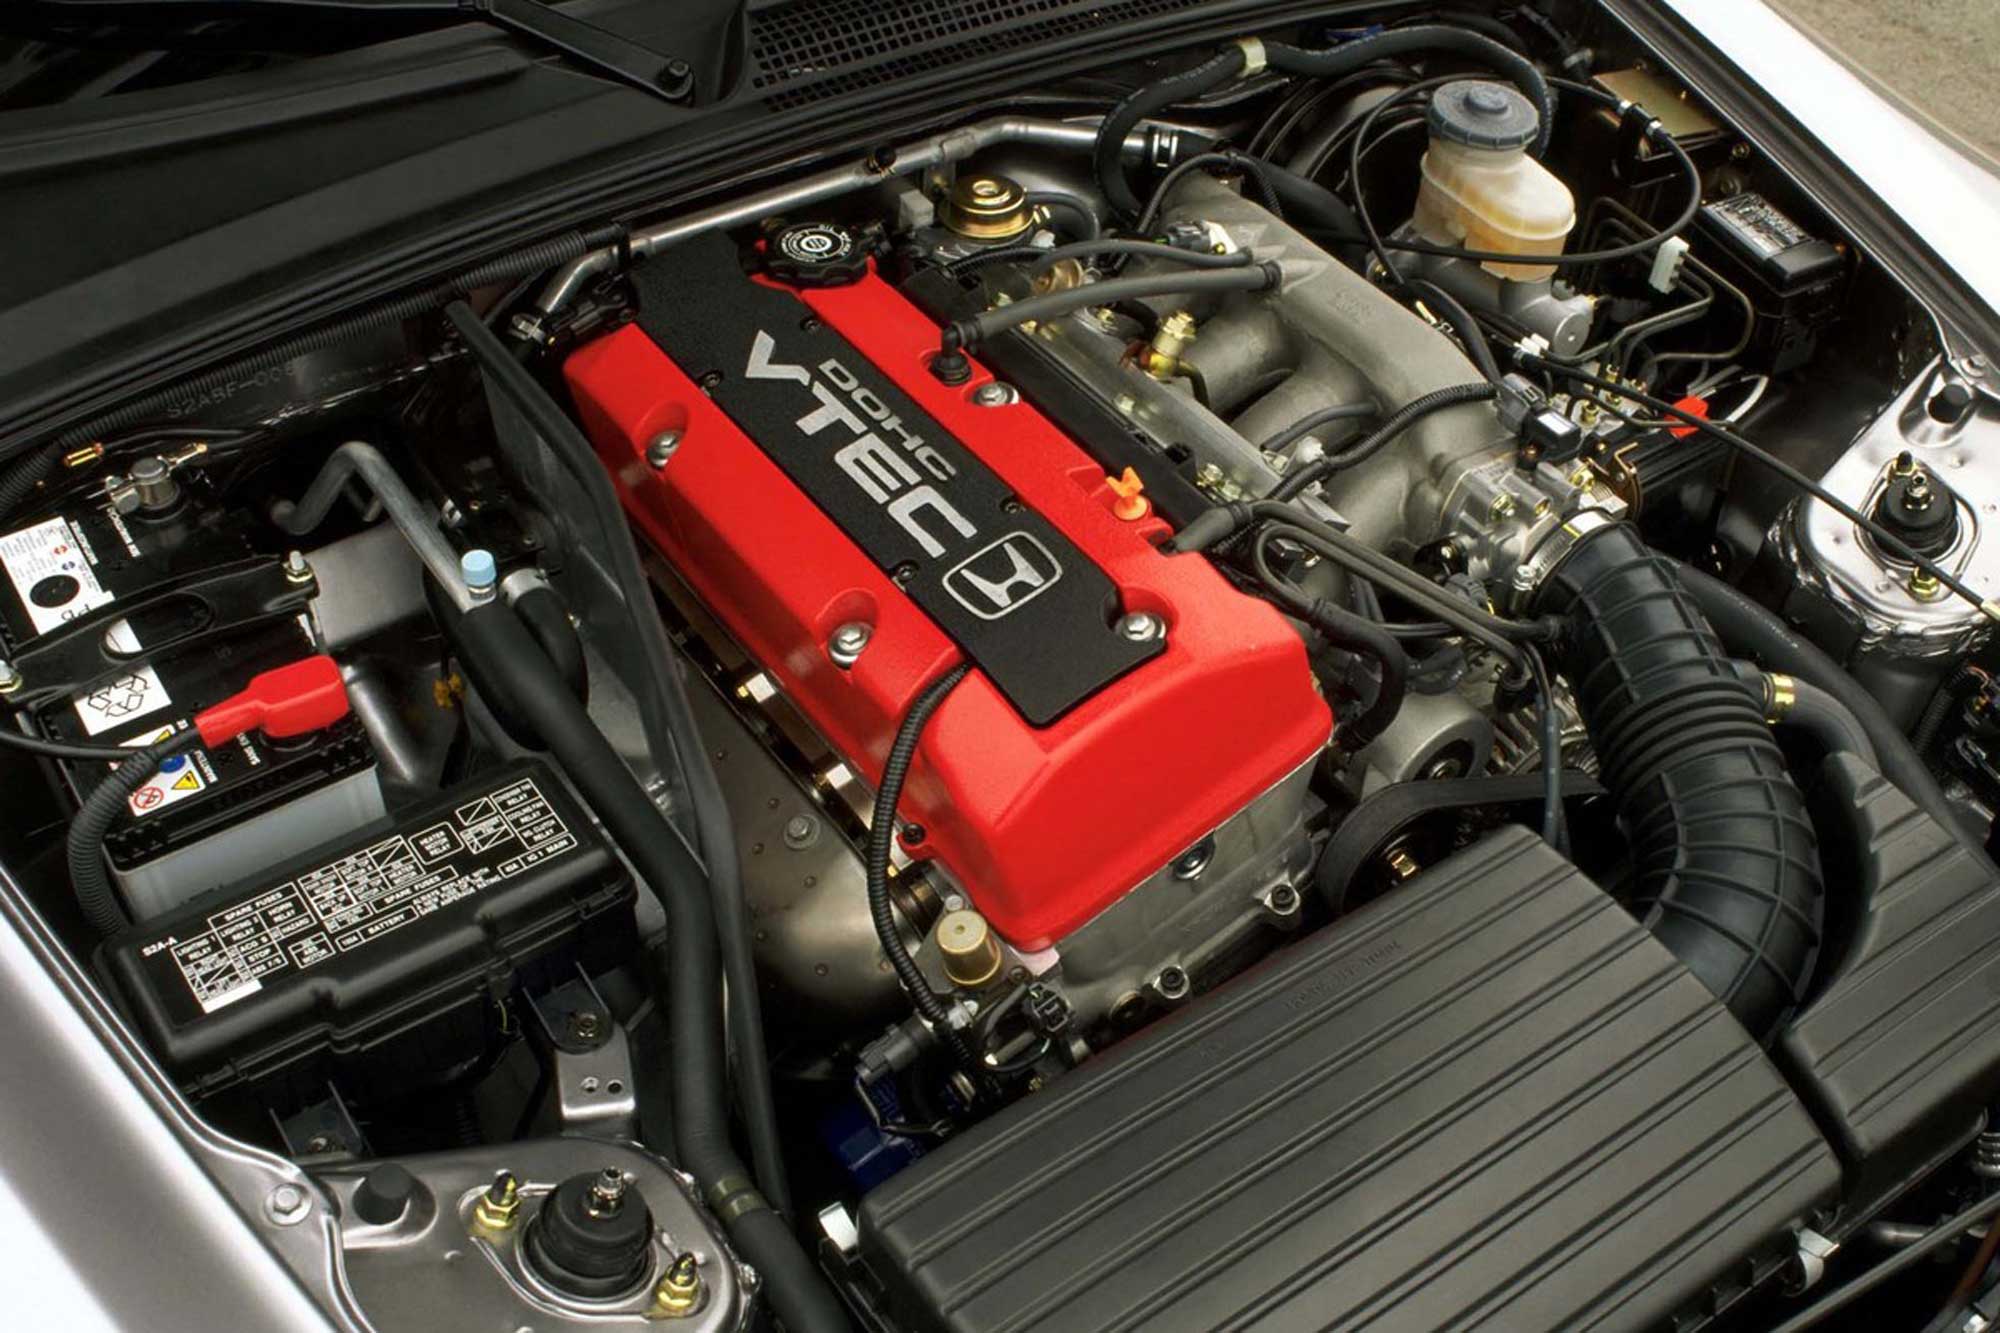 Honda engine with prominent VTEC markings on engine cover.